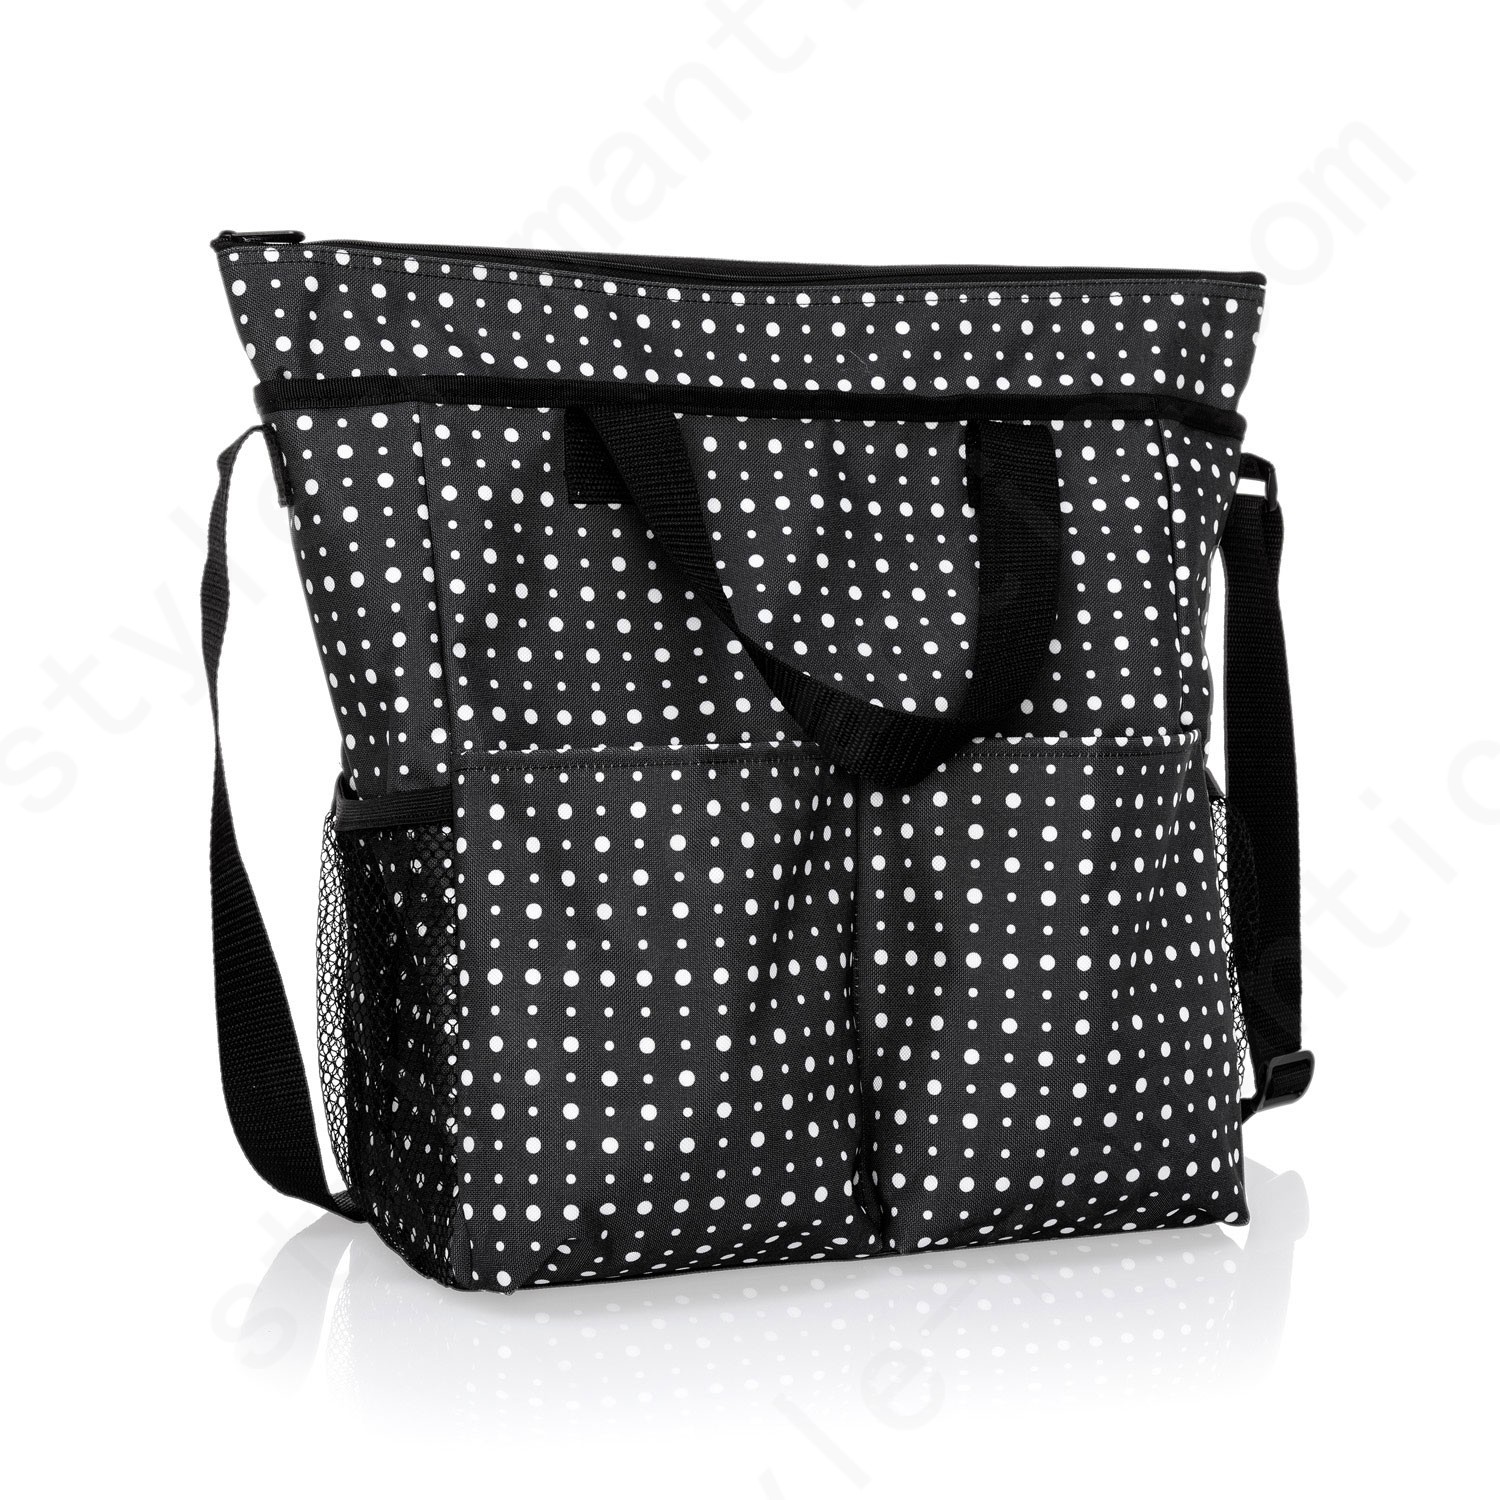 Thirty-One Gifts Crossbody Organizing Tote - Ditty Dot Handbags Accessories - Thirty-One Gifts Crossbody Organizing Tote - Ditty Dot Handbags Accessories